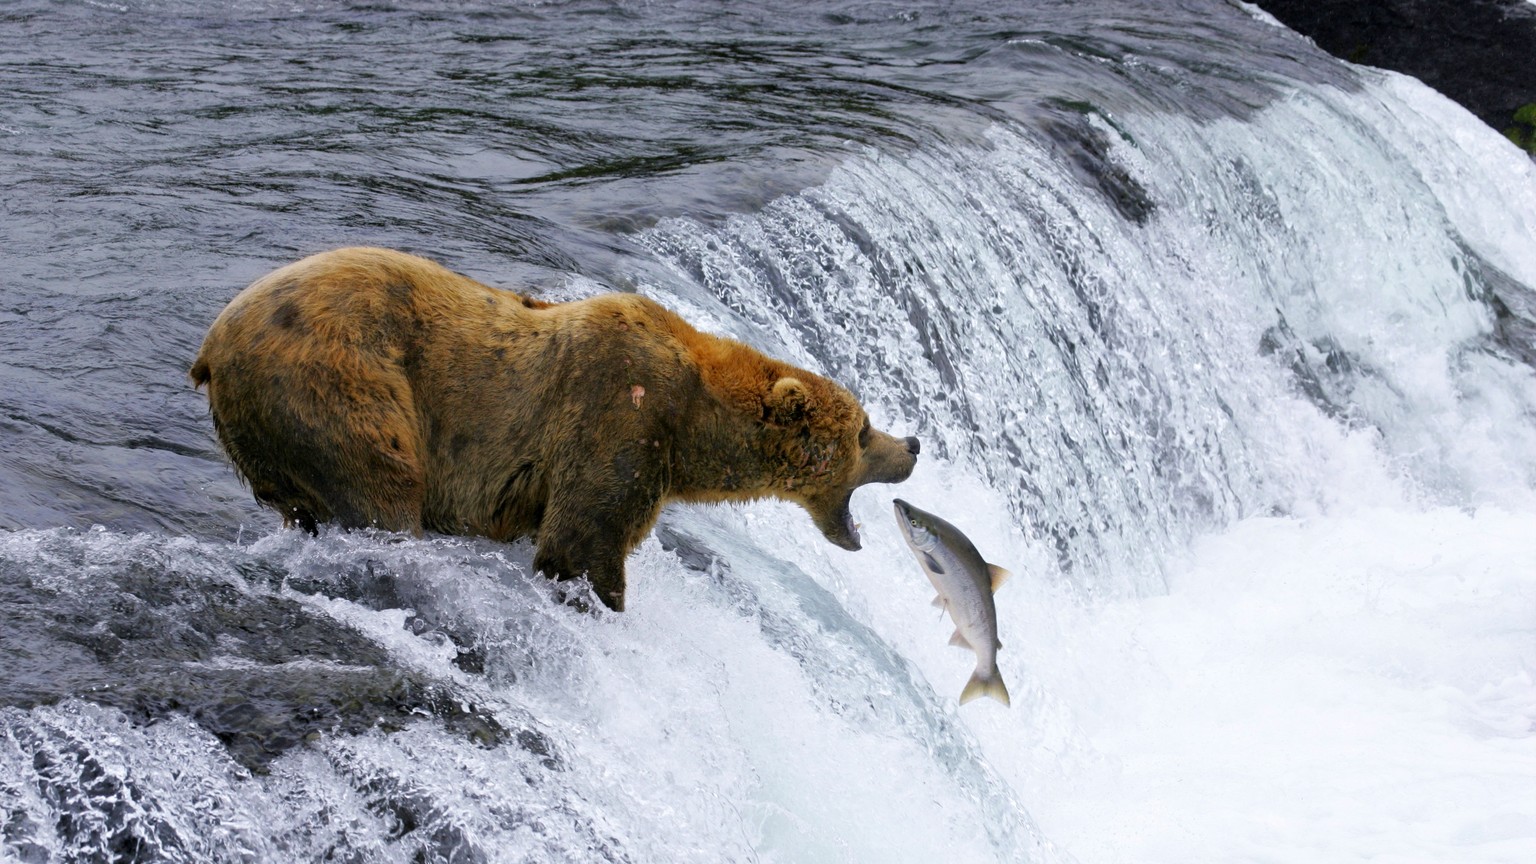 This undated image provided by MacGillivray Freeman Films shows a brown bear catching salmon in Katmai National Park and Preserve in Alaska, shot in slow motion with a telephoto lens. The image appear ...